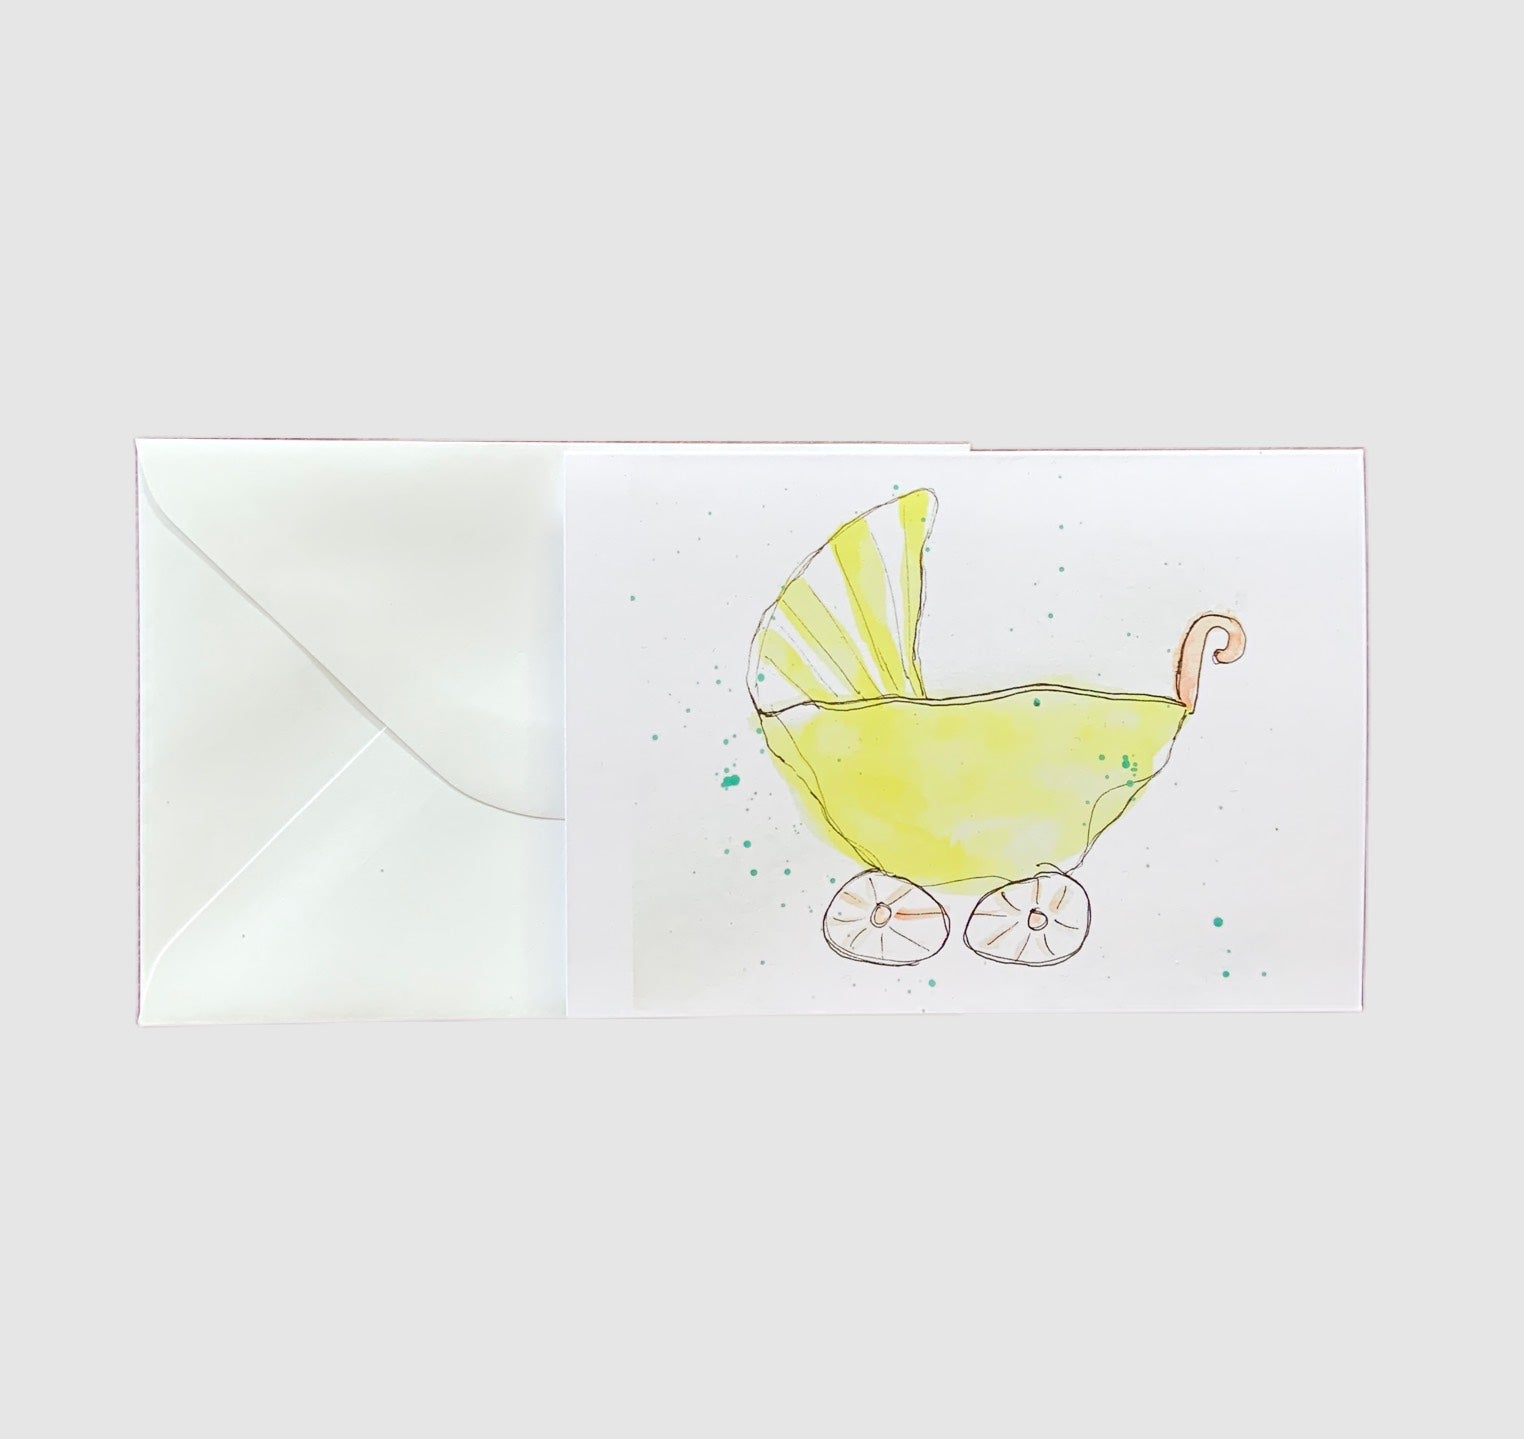 A sketch of a baby buggy painted with watercolors on the front of a greeting card.